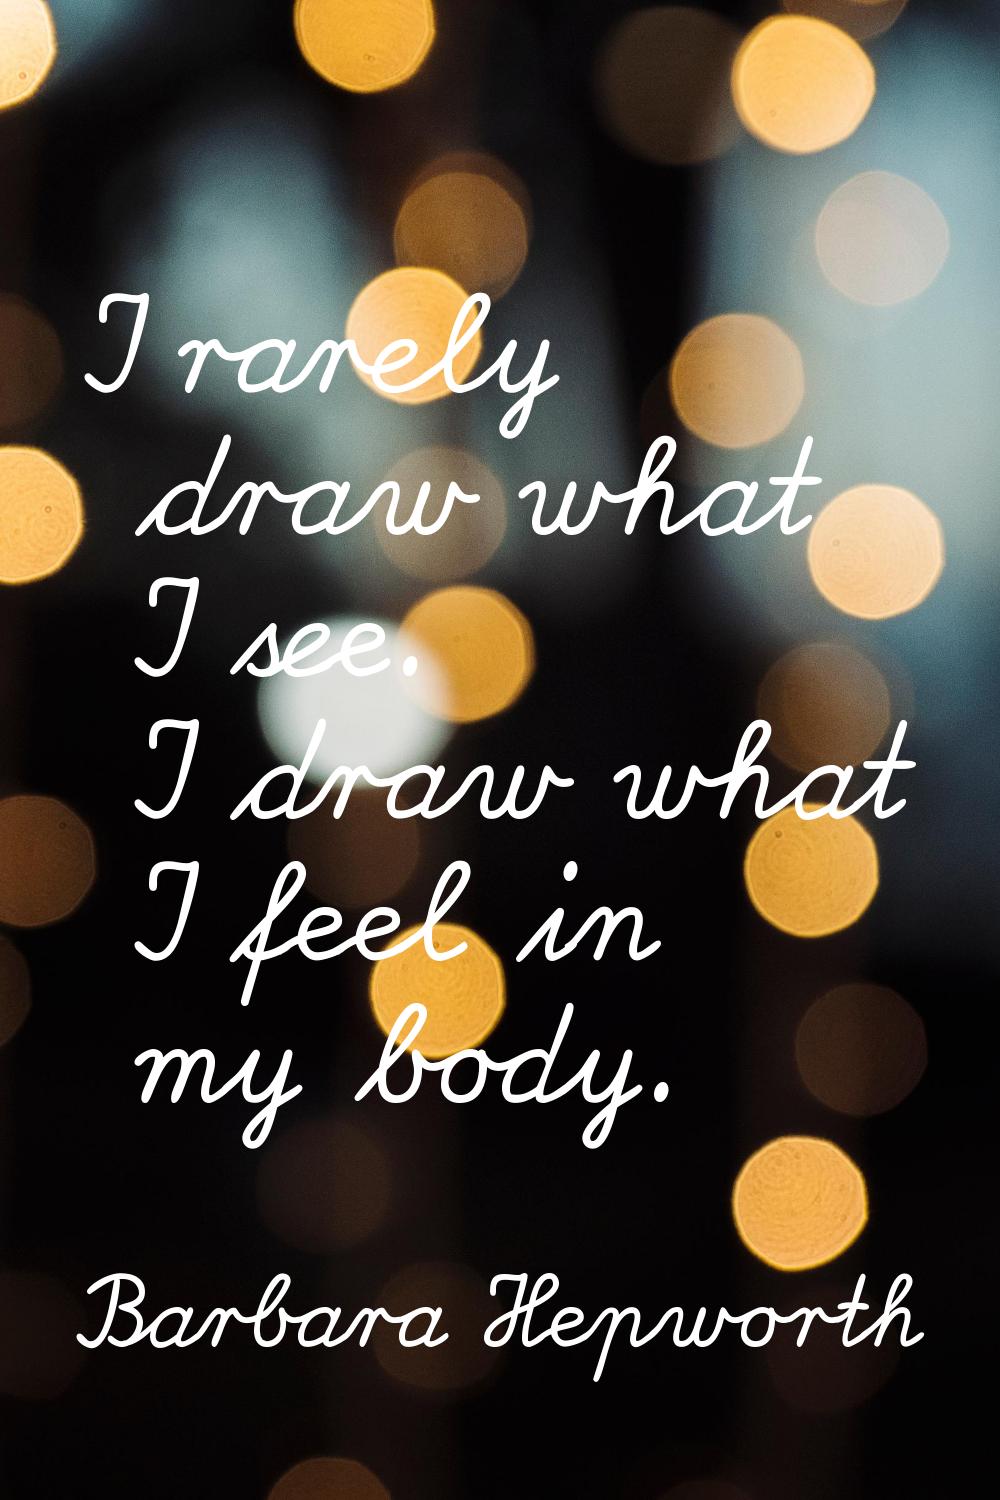 I rarely draw what I see. I draw what I feel in my body.